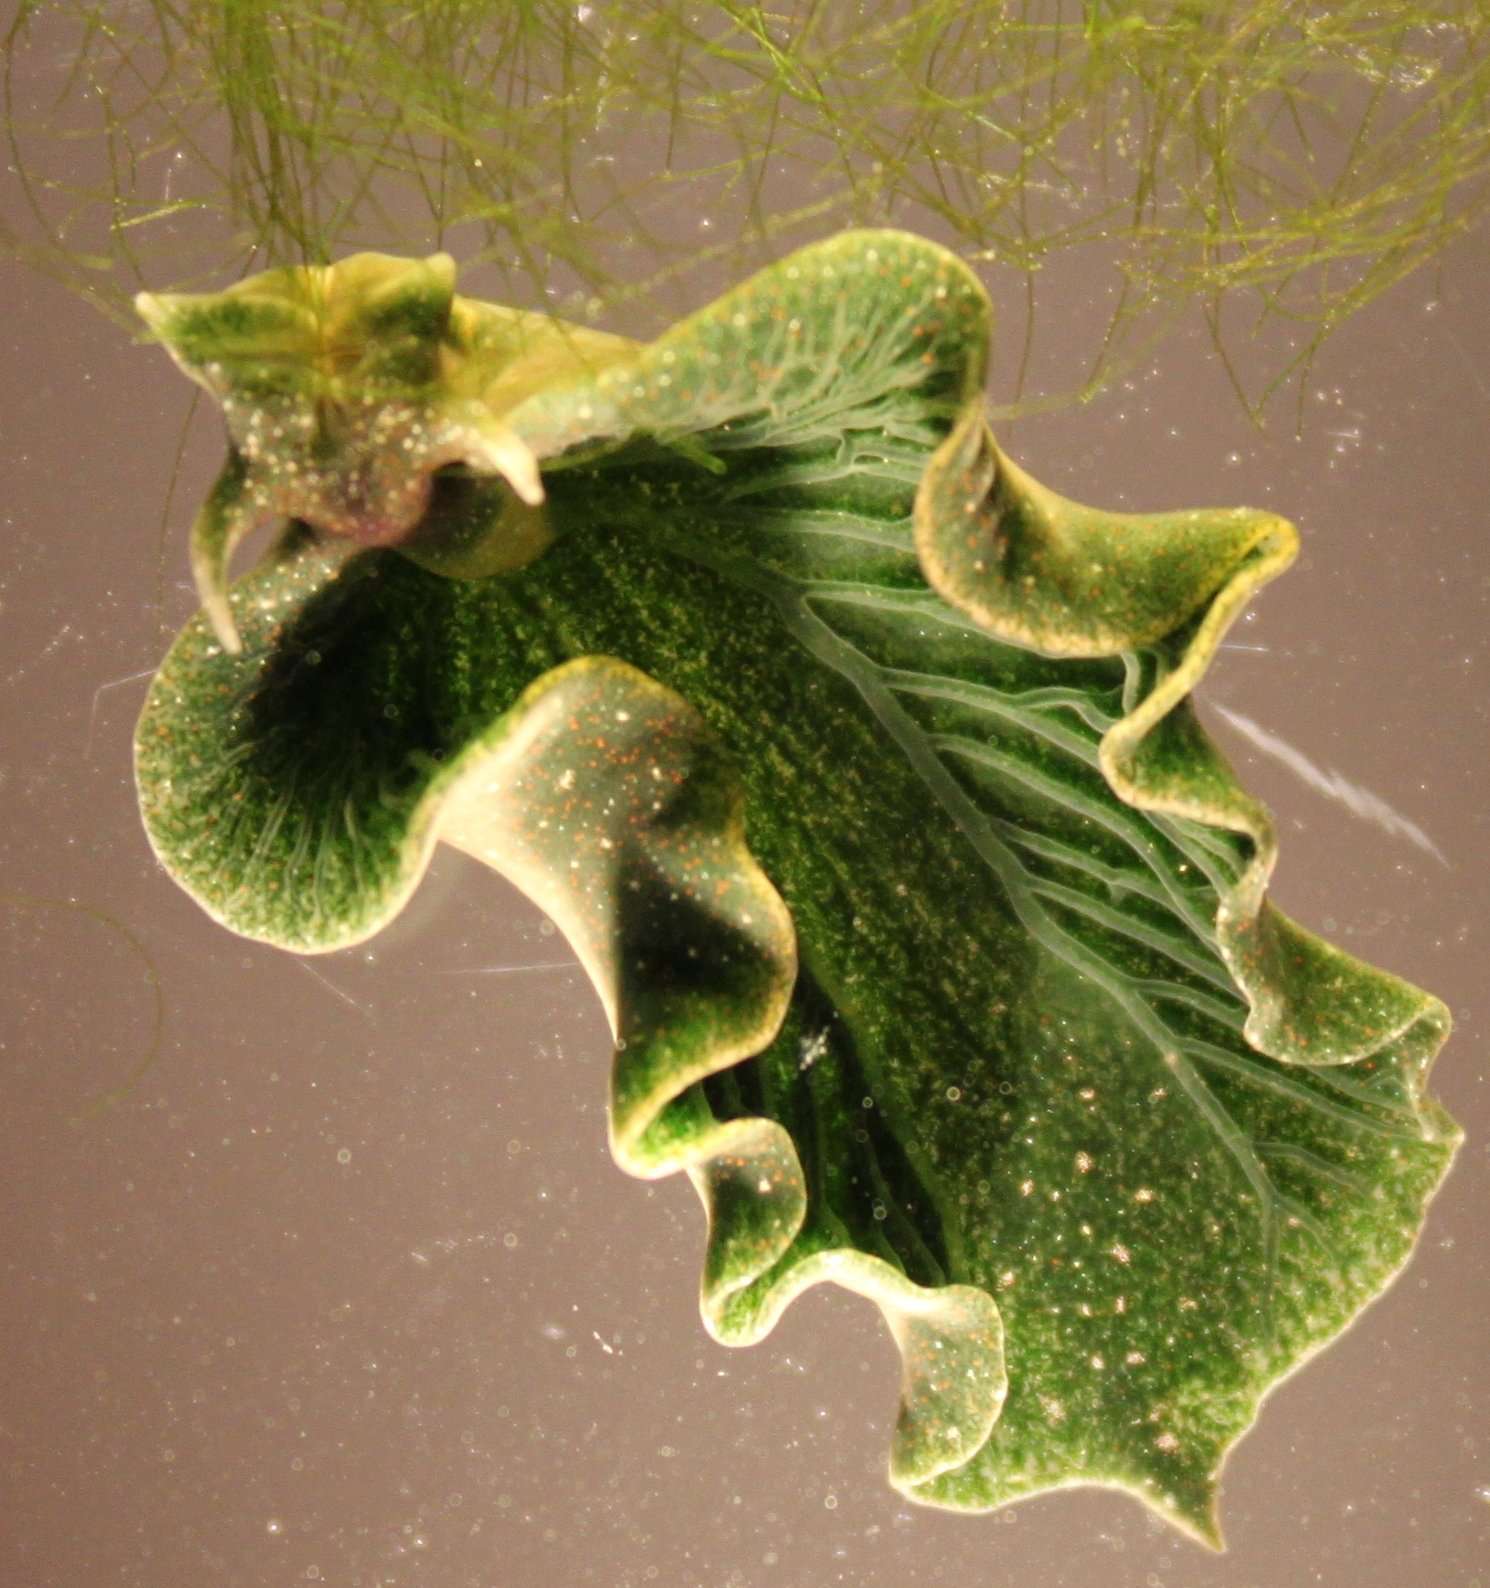 image for Solar Powered Sea Slugs Shed Light on Search for Perpetual Green Energy